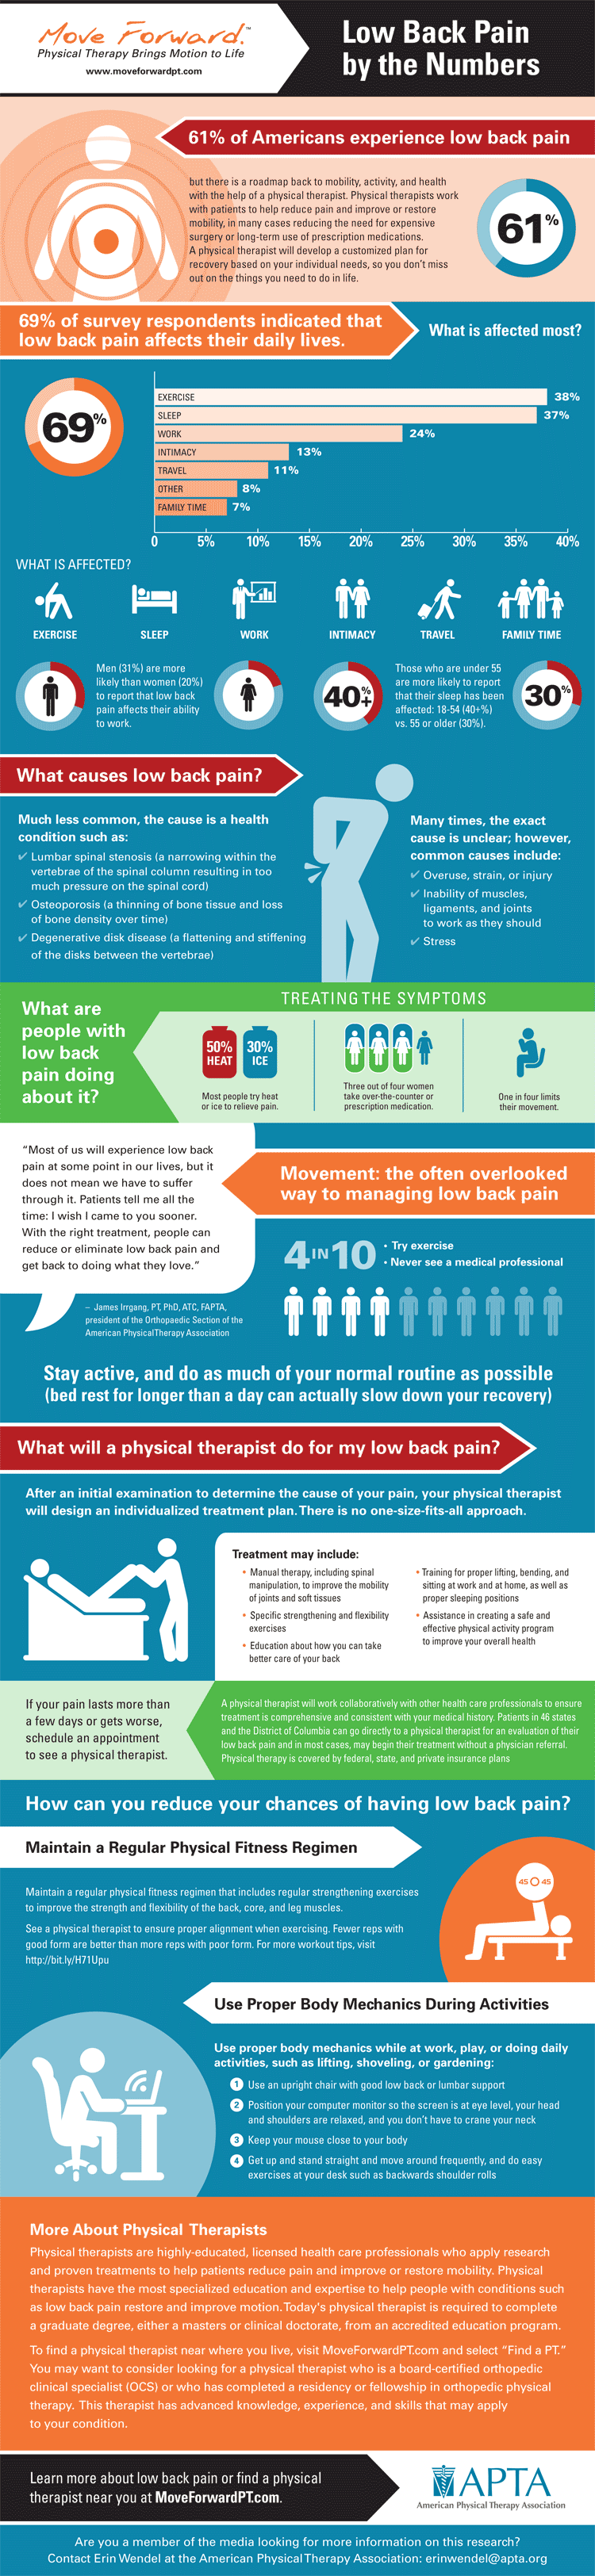 10. Low back pain by the numbers